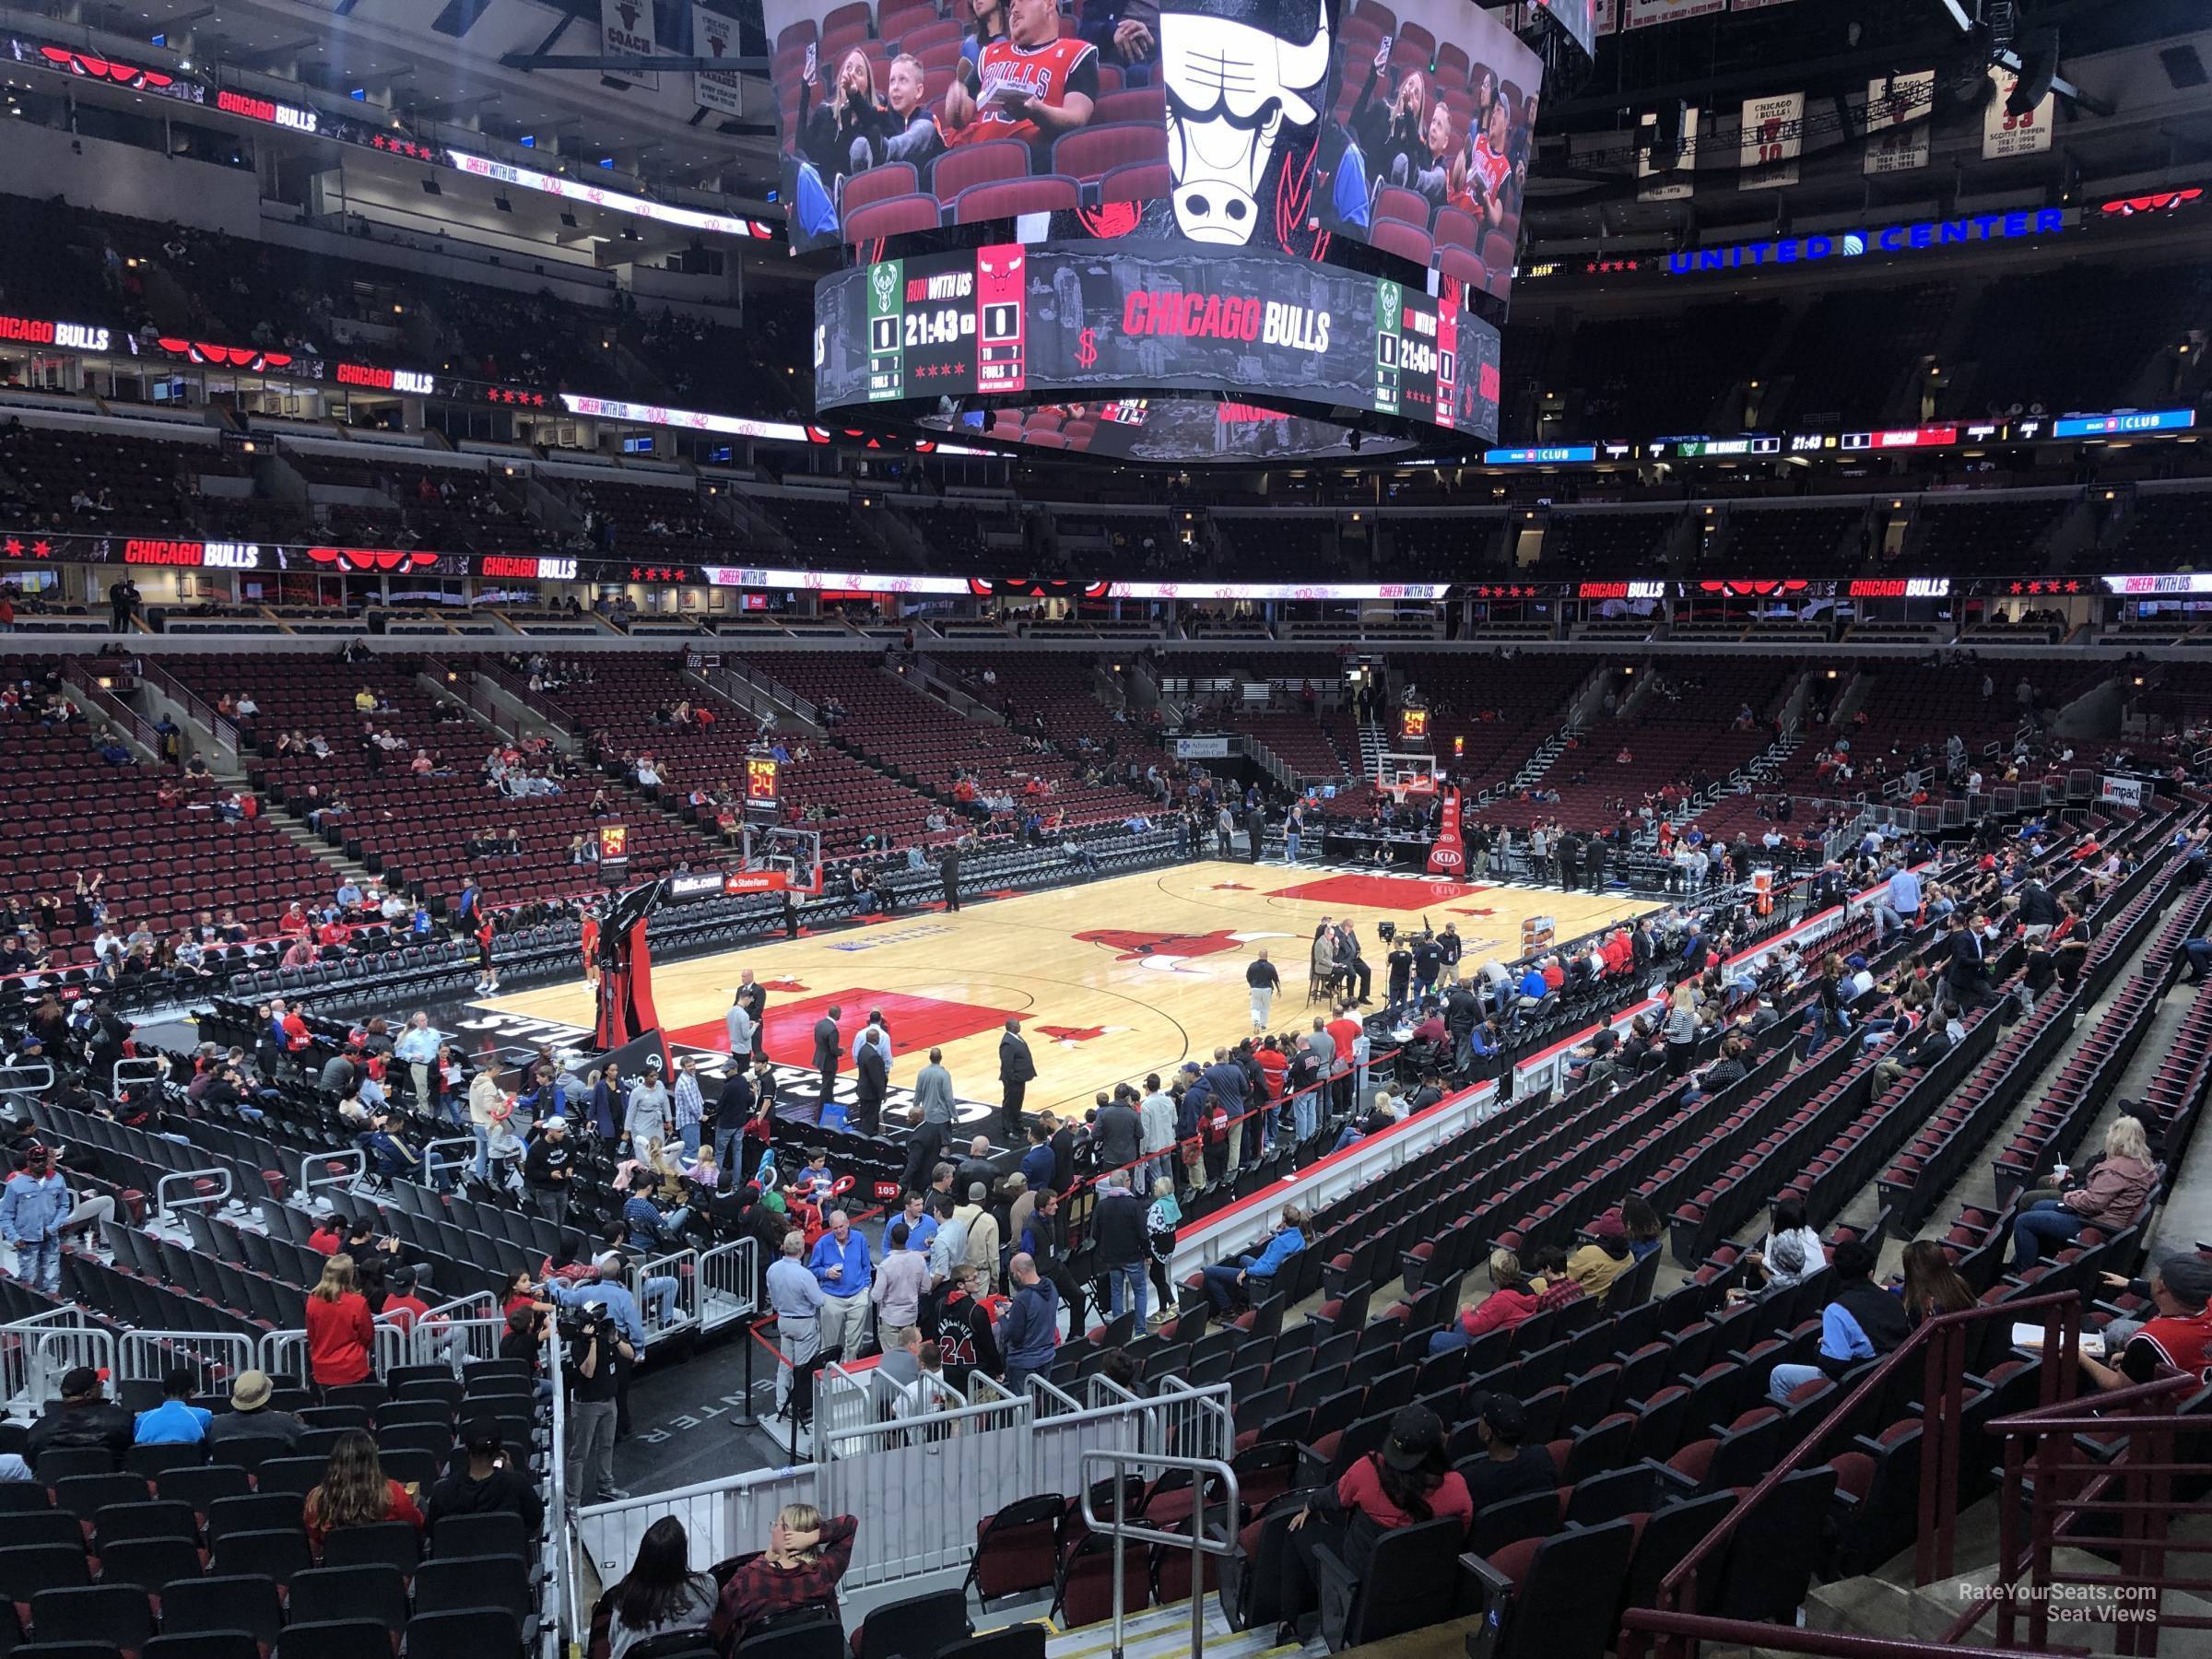 Section 104 at United Center - Chicago Bulls - RateYourSeats.com